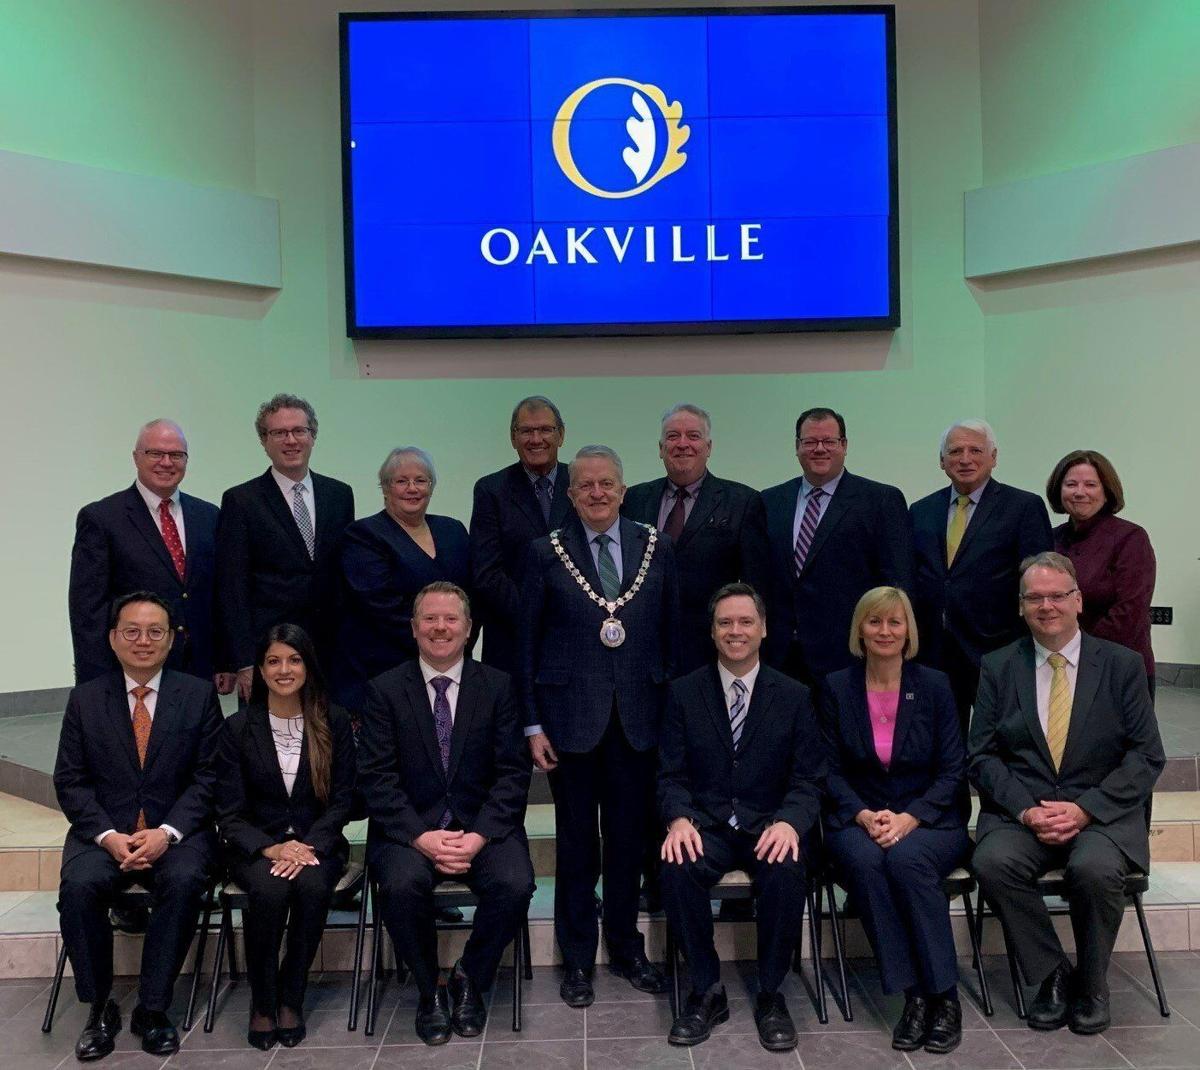 Oakville council, front row sitting, back row standing, with Mayor Rob Burton standing in the middle. Behind them, an Oakville logo is projected onto a screen